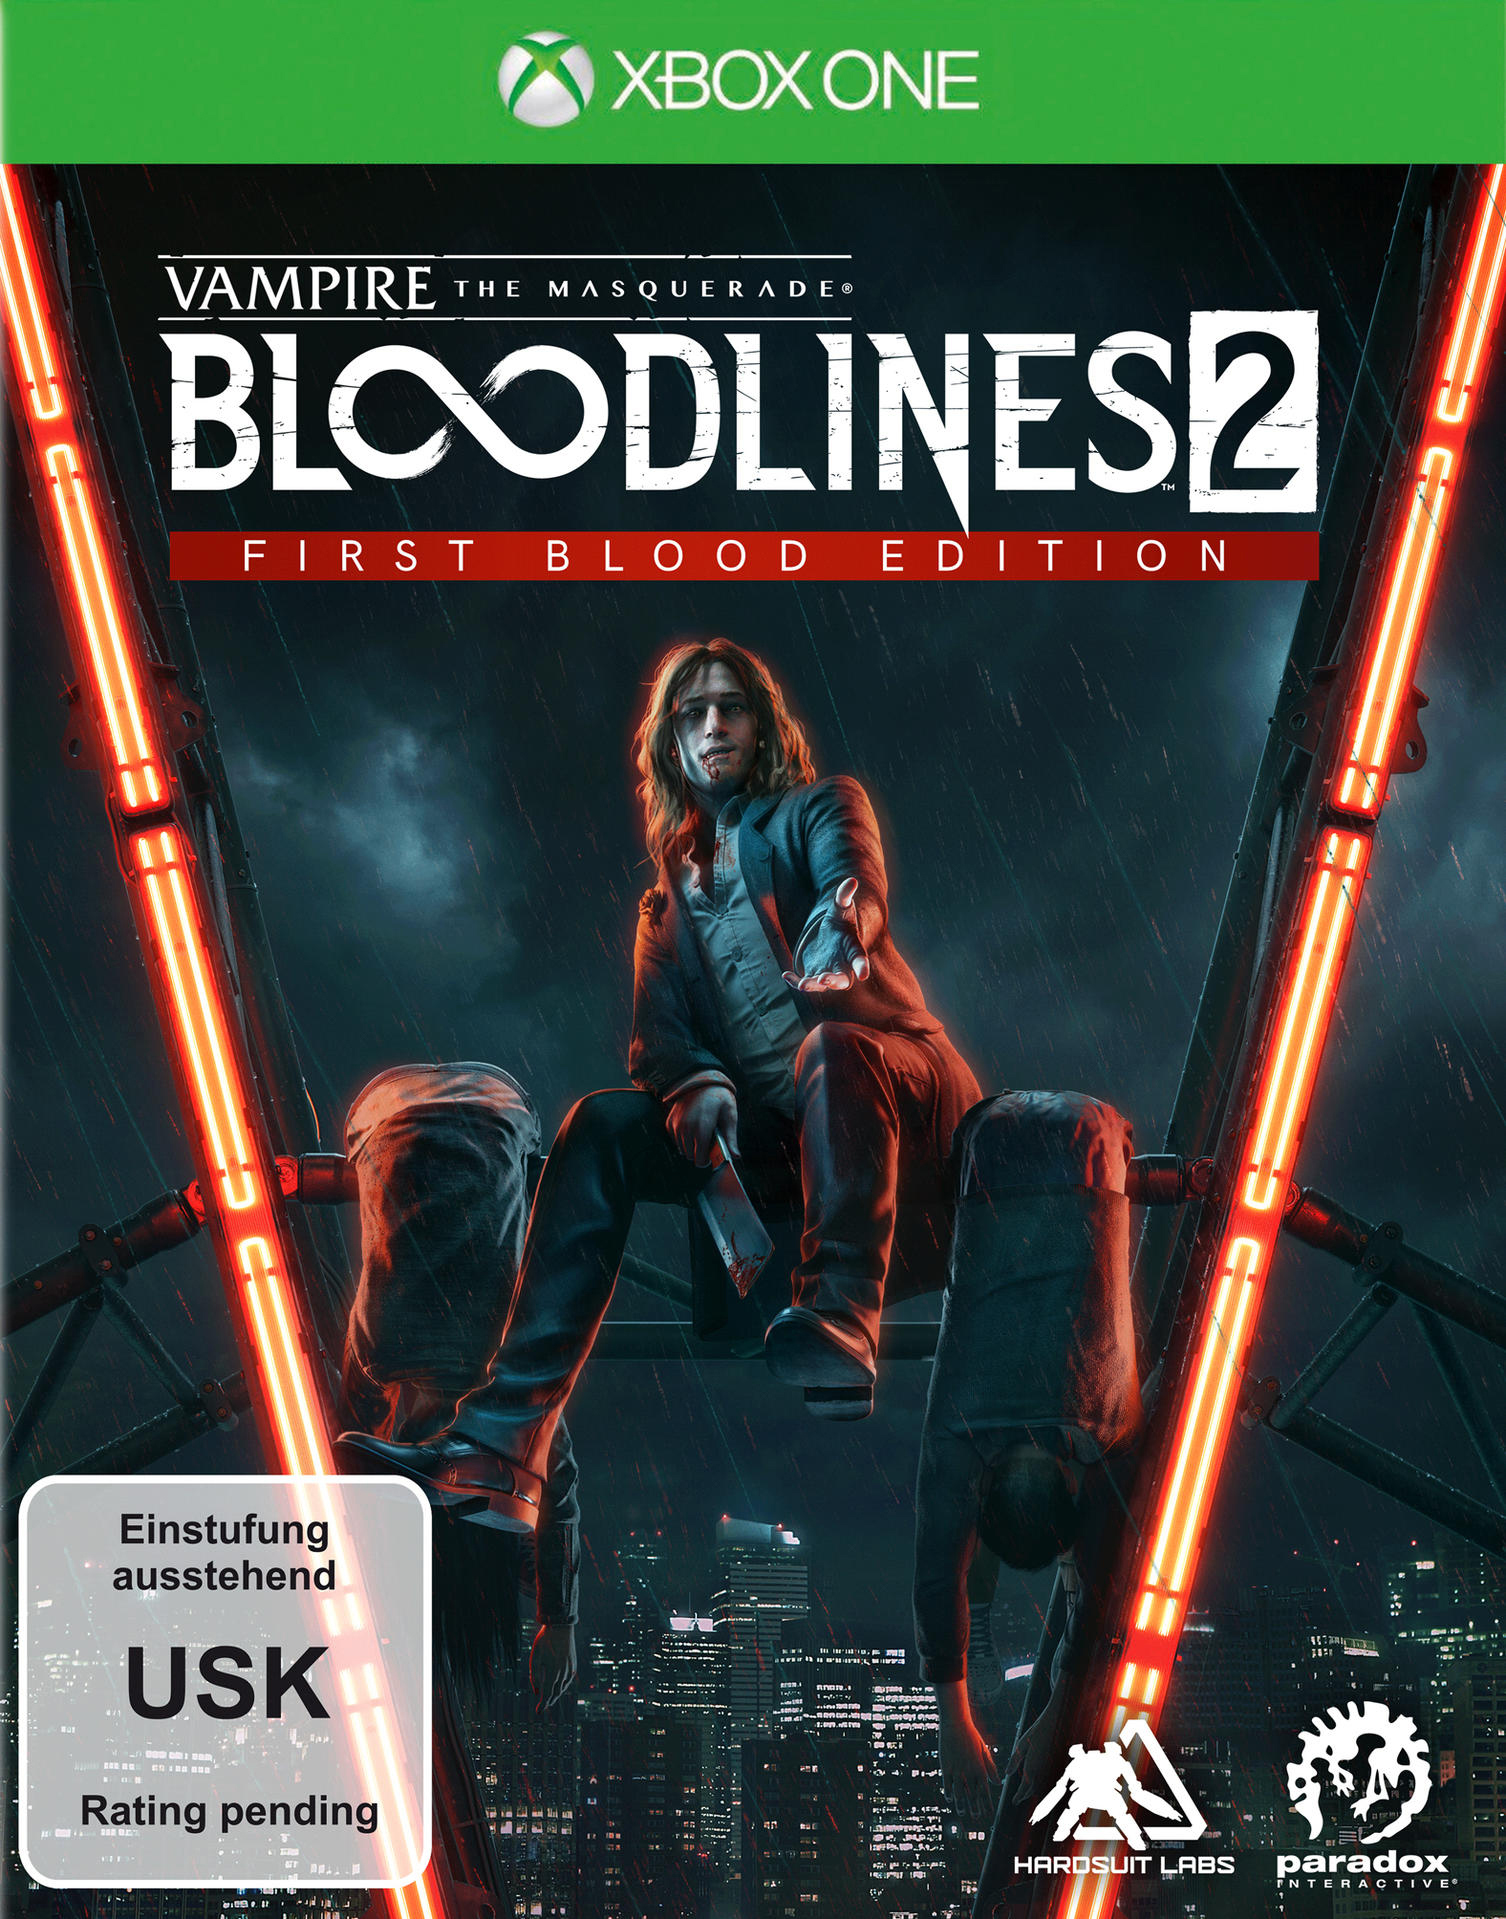 Vampire: The Edition One] Bloodlines Blood 2 [Xbox First - - Masquerade